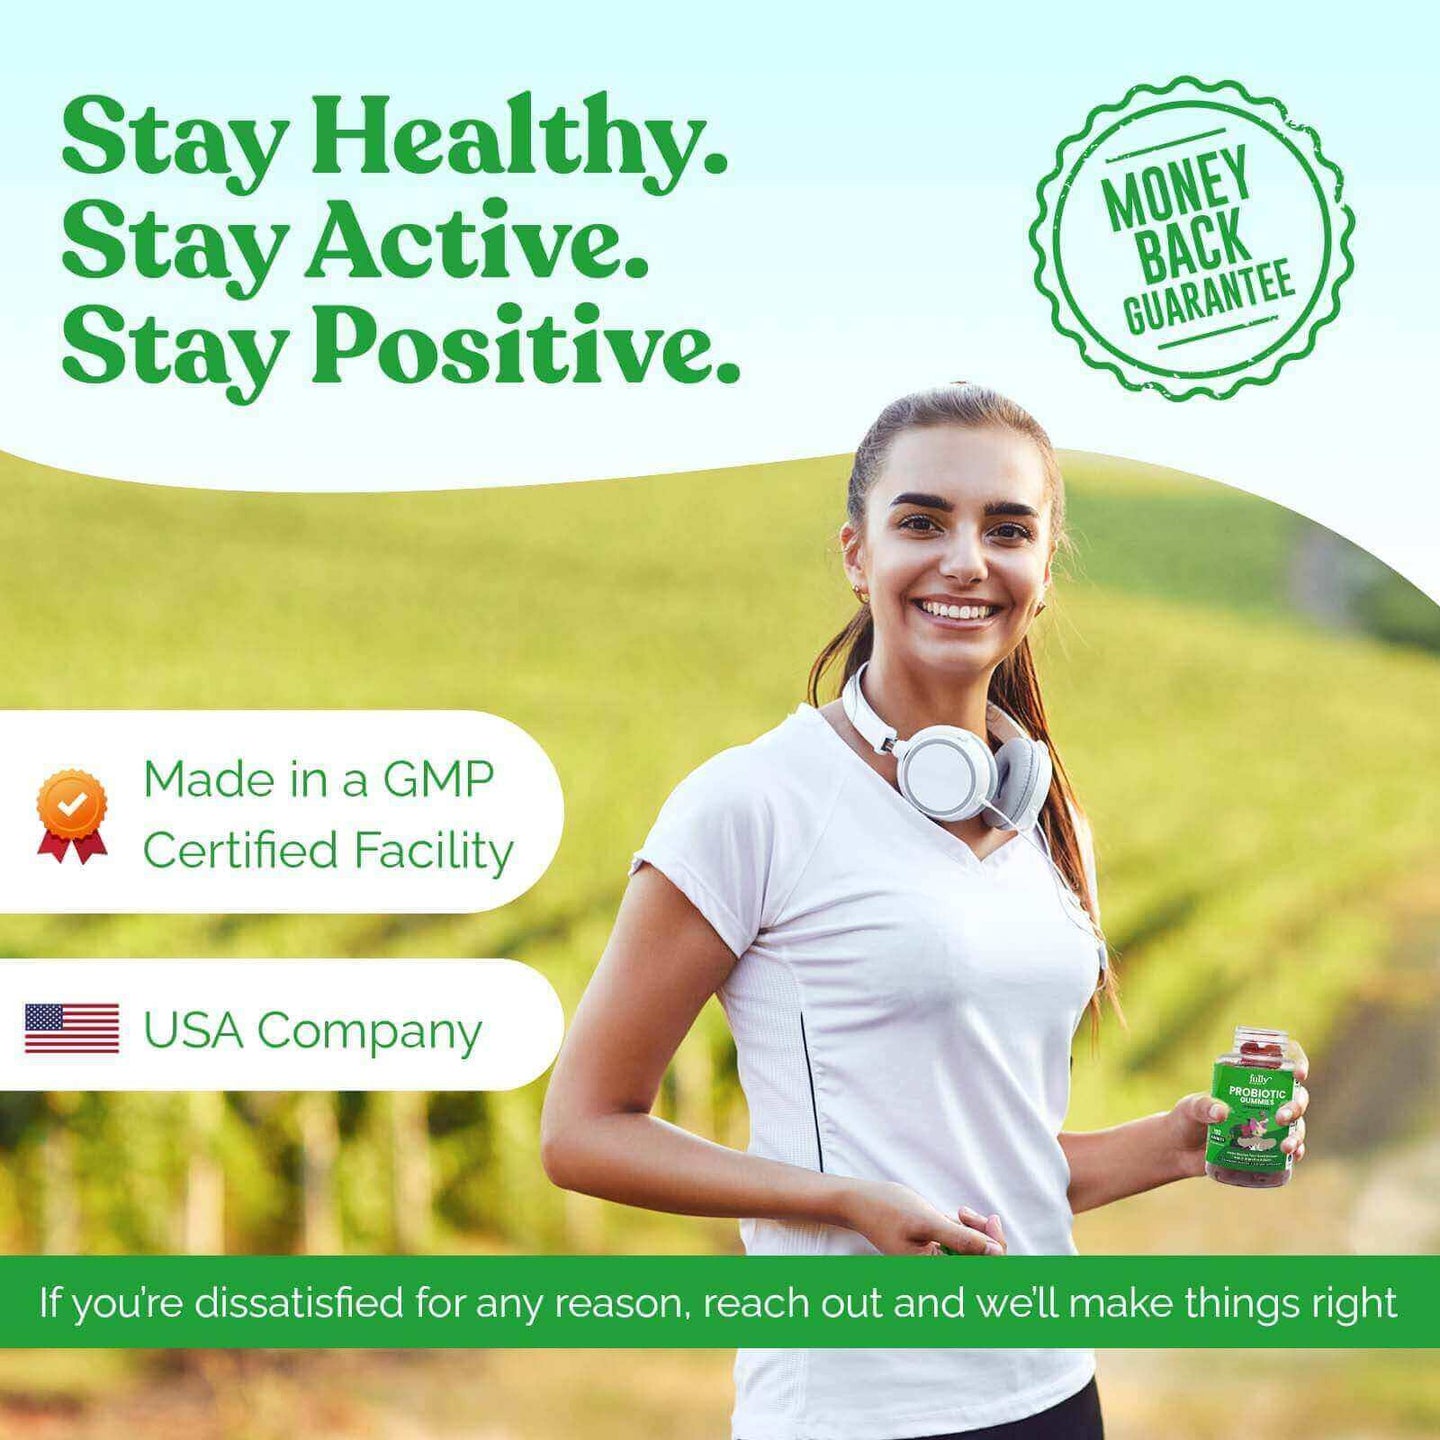 Stay healthy and support your gut health with our high-quality probiotic gummies. Made in a GMP certified facility and backed by a money-back guarantee from a USA-based company.